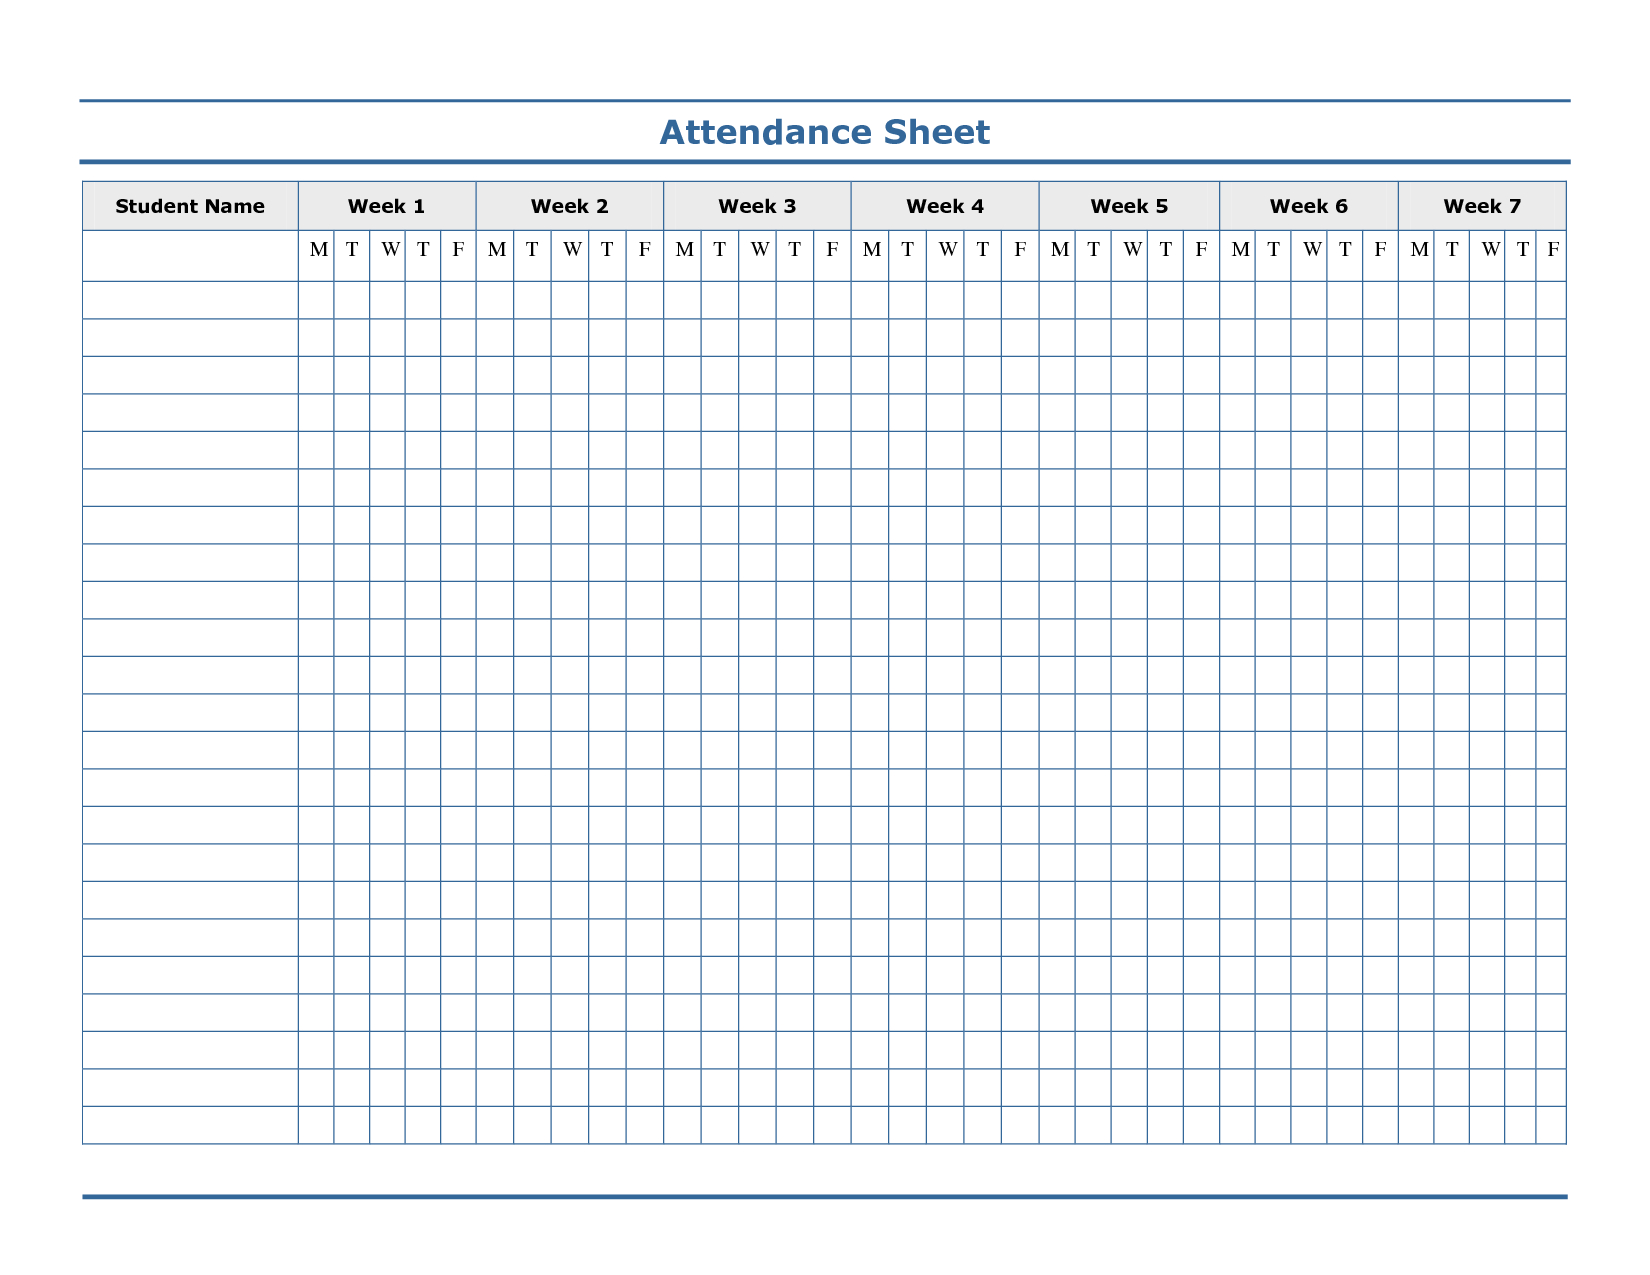 Free Printable Blank Attendance Sheets | Attendance Sheet - Free Printable Attendance Sheets